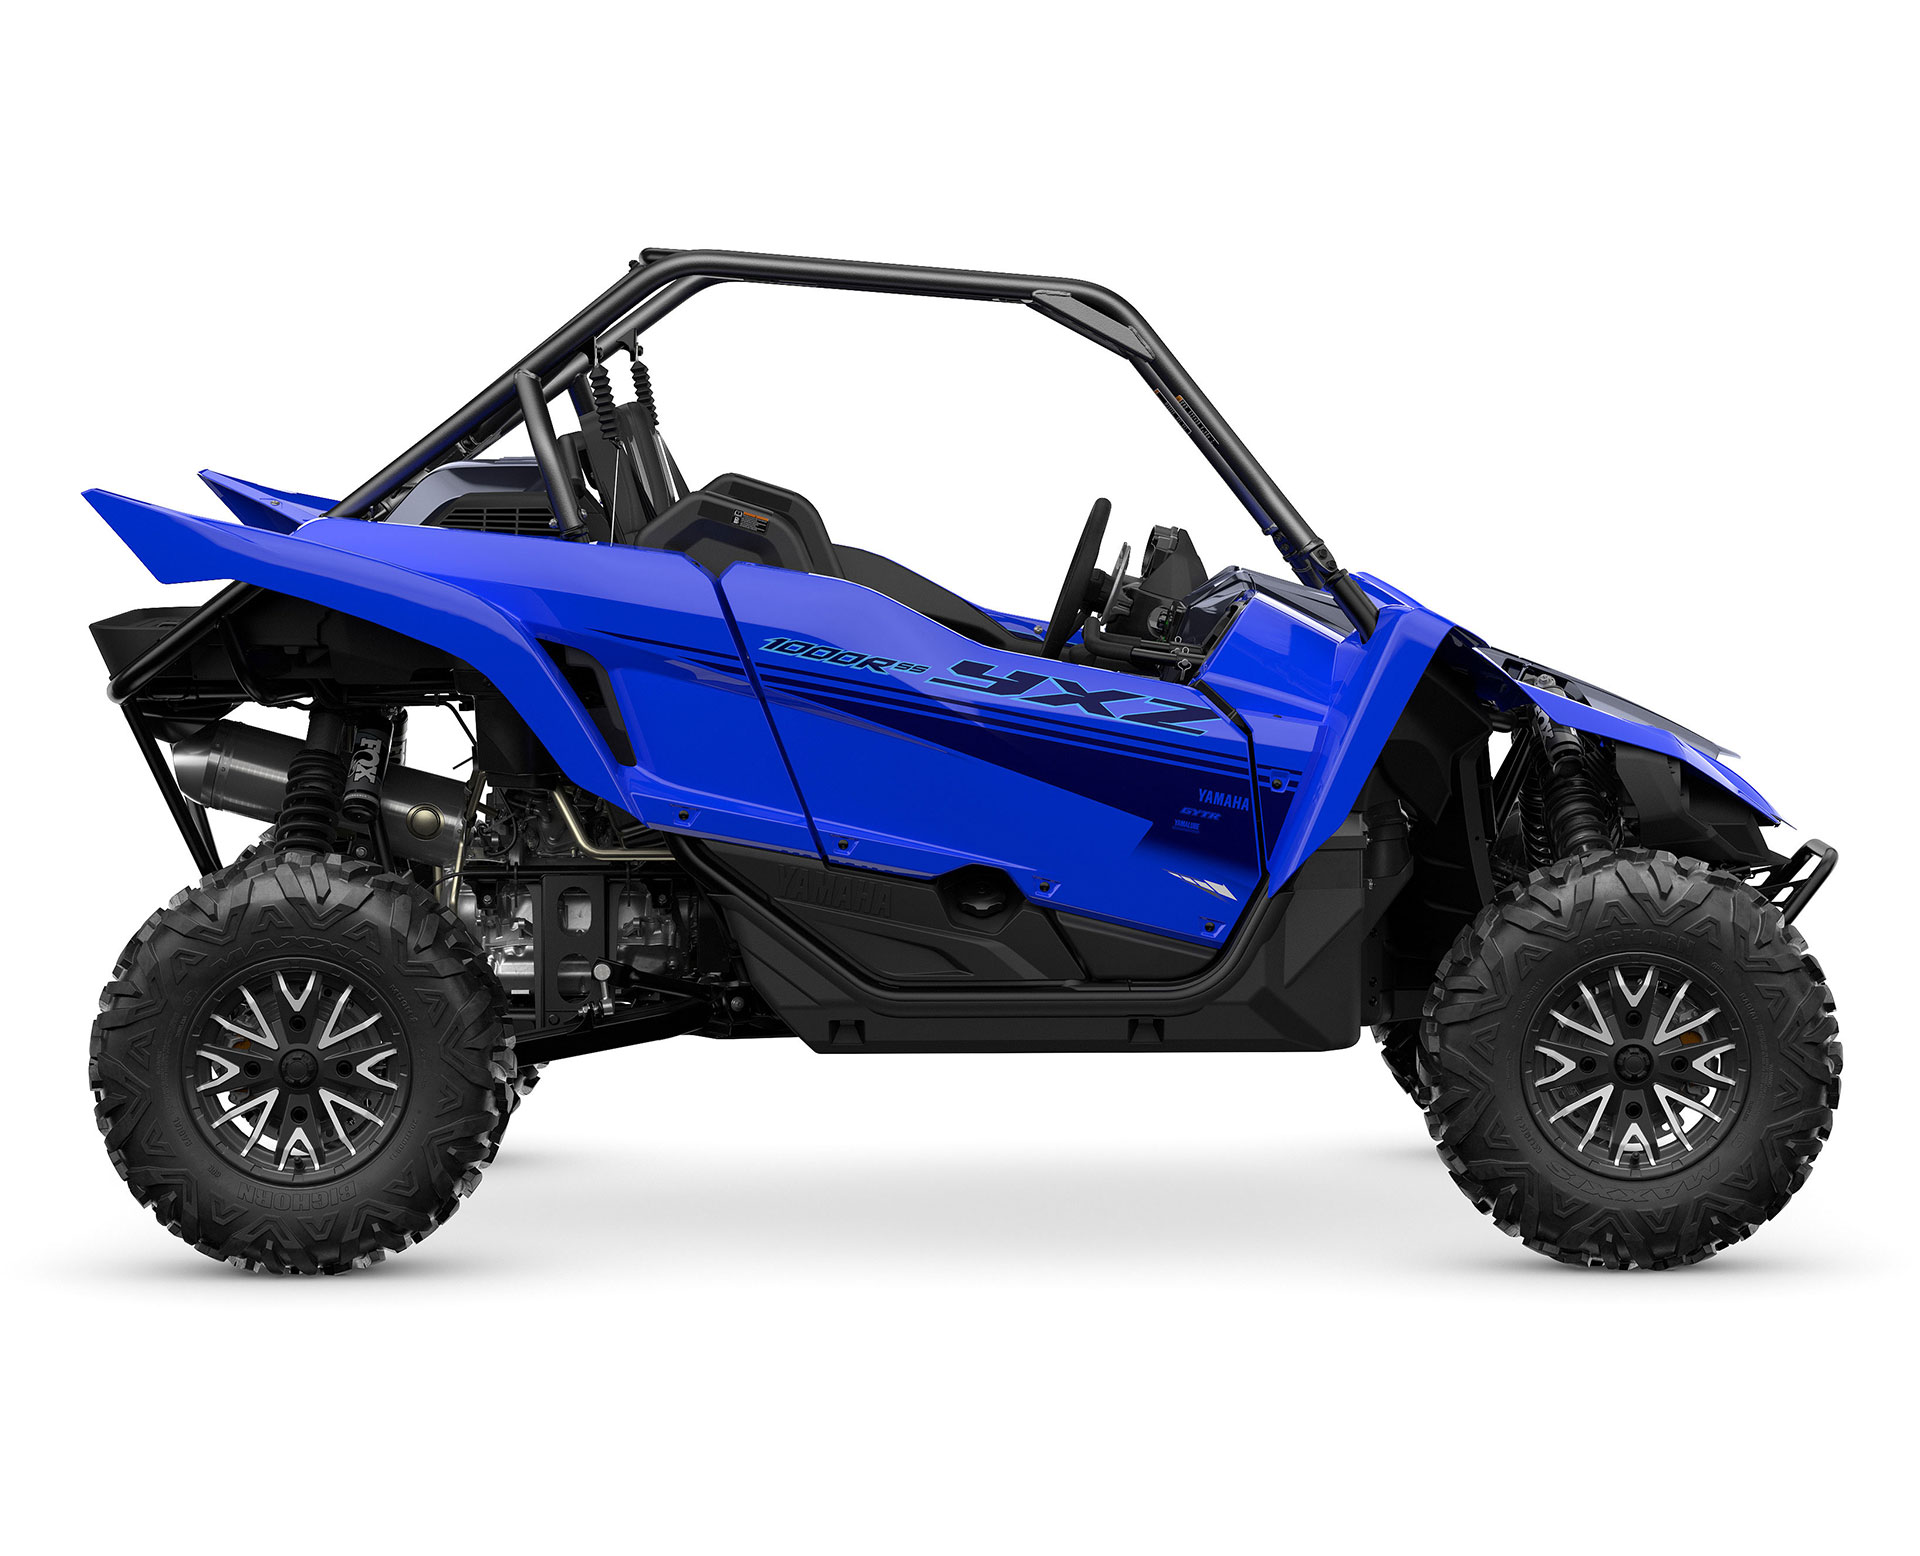 Thumbnail of your customized 2024 YXZ1000R SS EPS